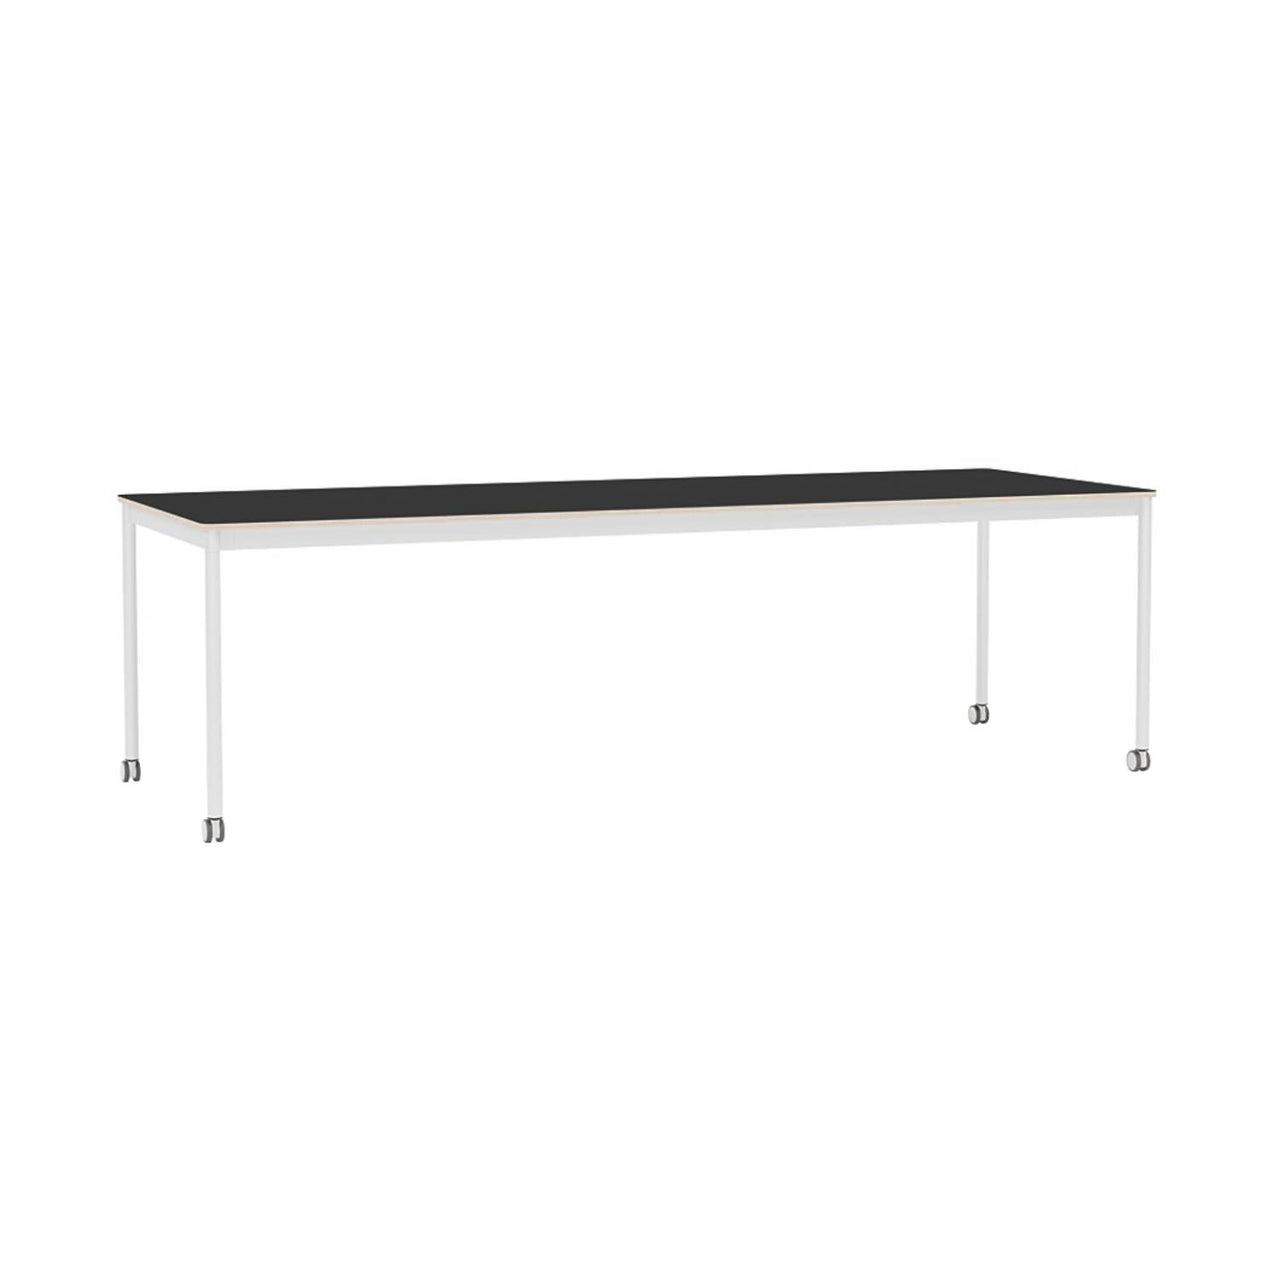 Base Table with Castors: Large + 98.4